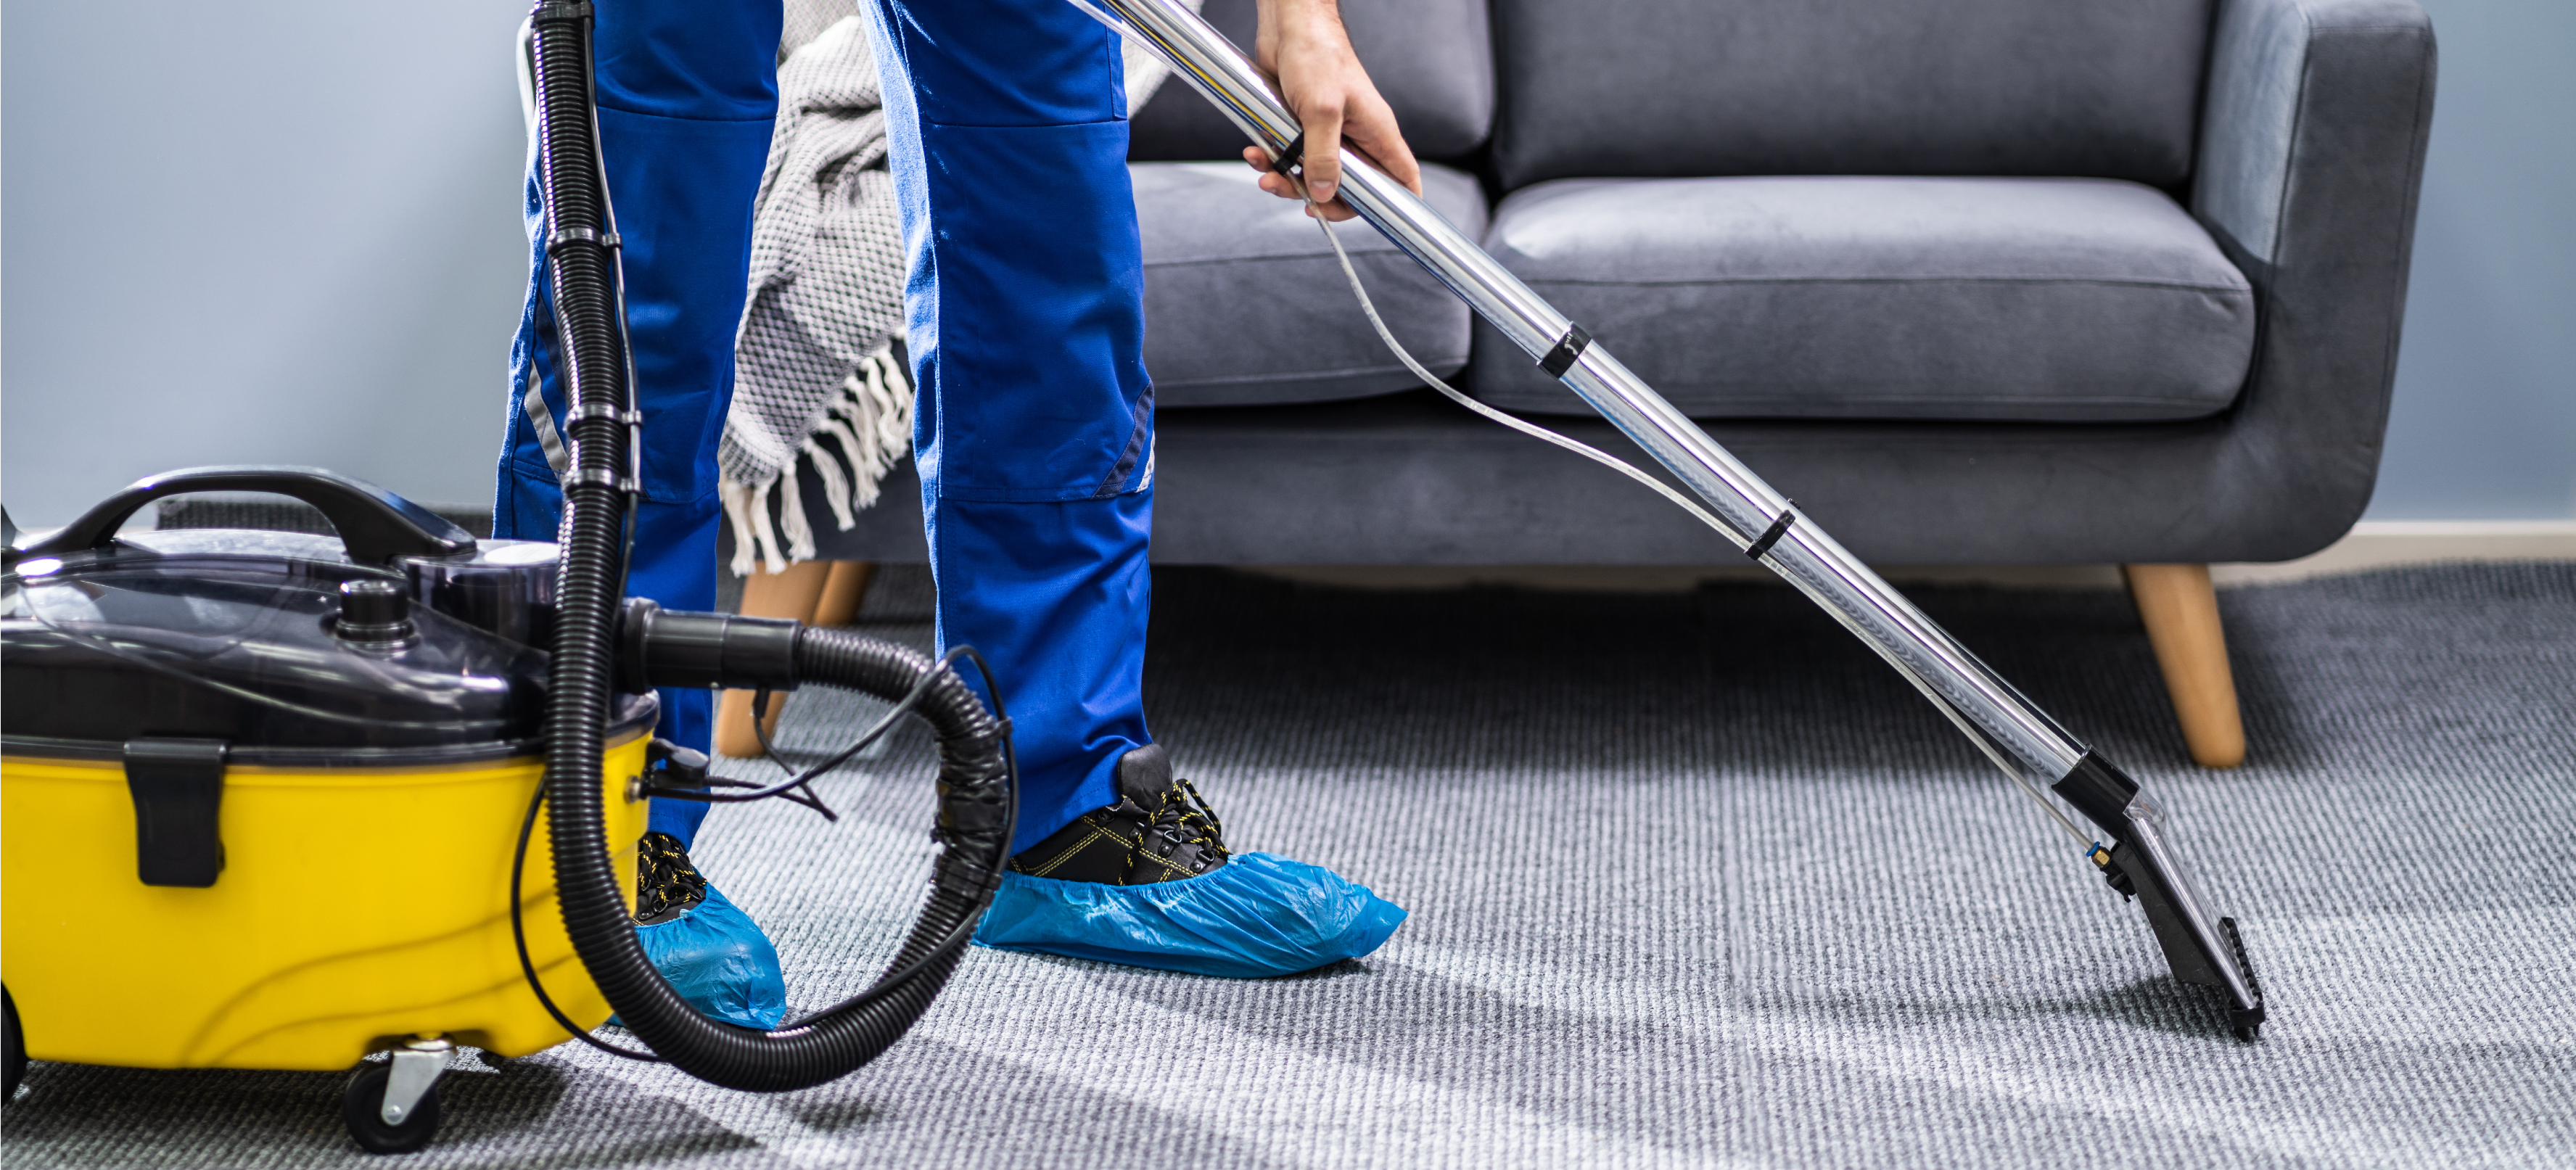 Tips To Clean Your Carpets And Rugs At Home